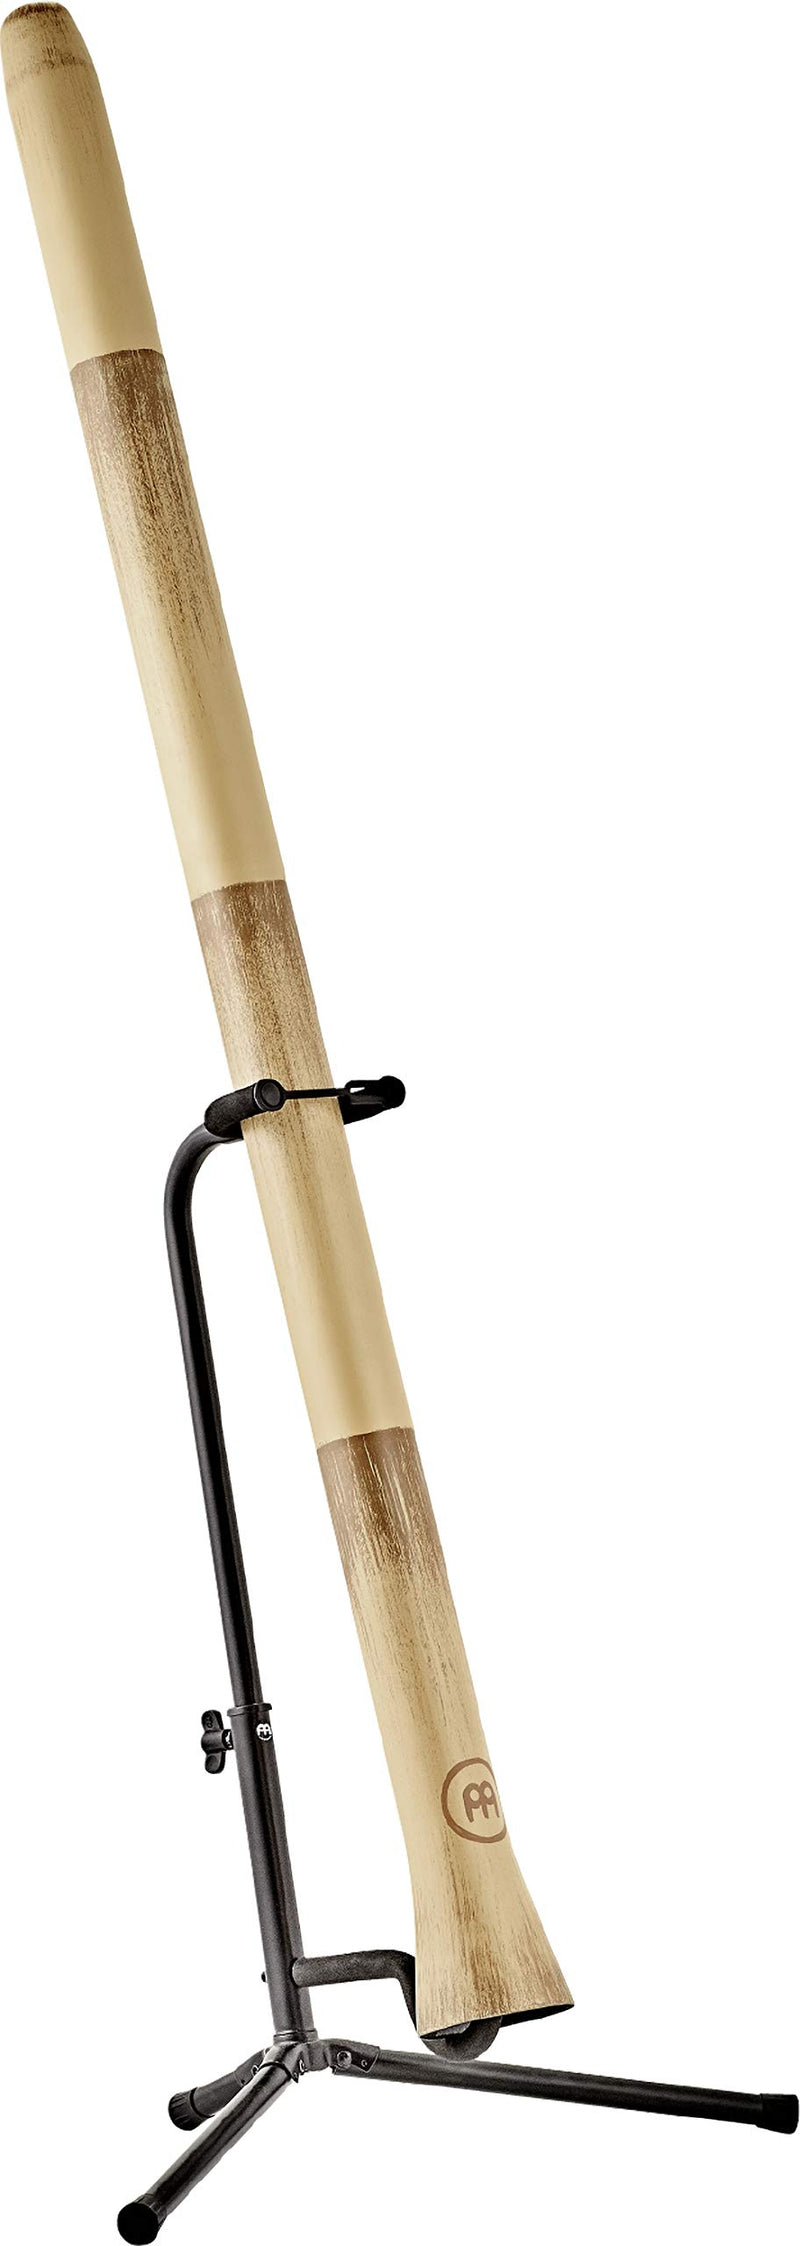 Meinl Percussion Didgeridoo Stand with Padded Holders Stable Tripod Base — Black Powder Coated Aluminum with Foldable Legs, 2-YEAR WARRANTY (DDG